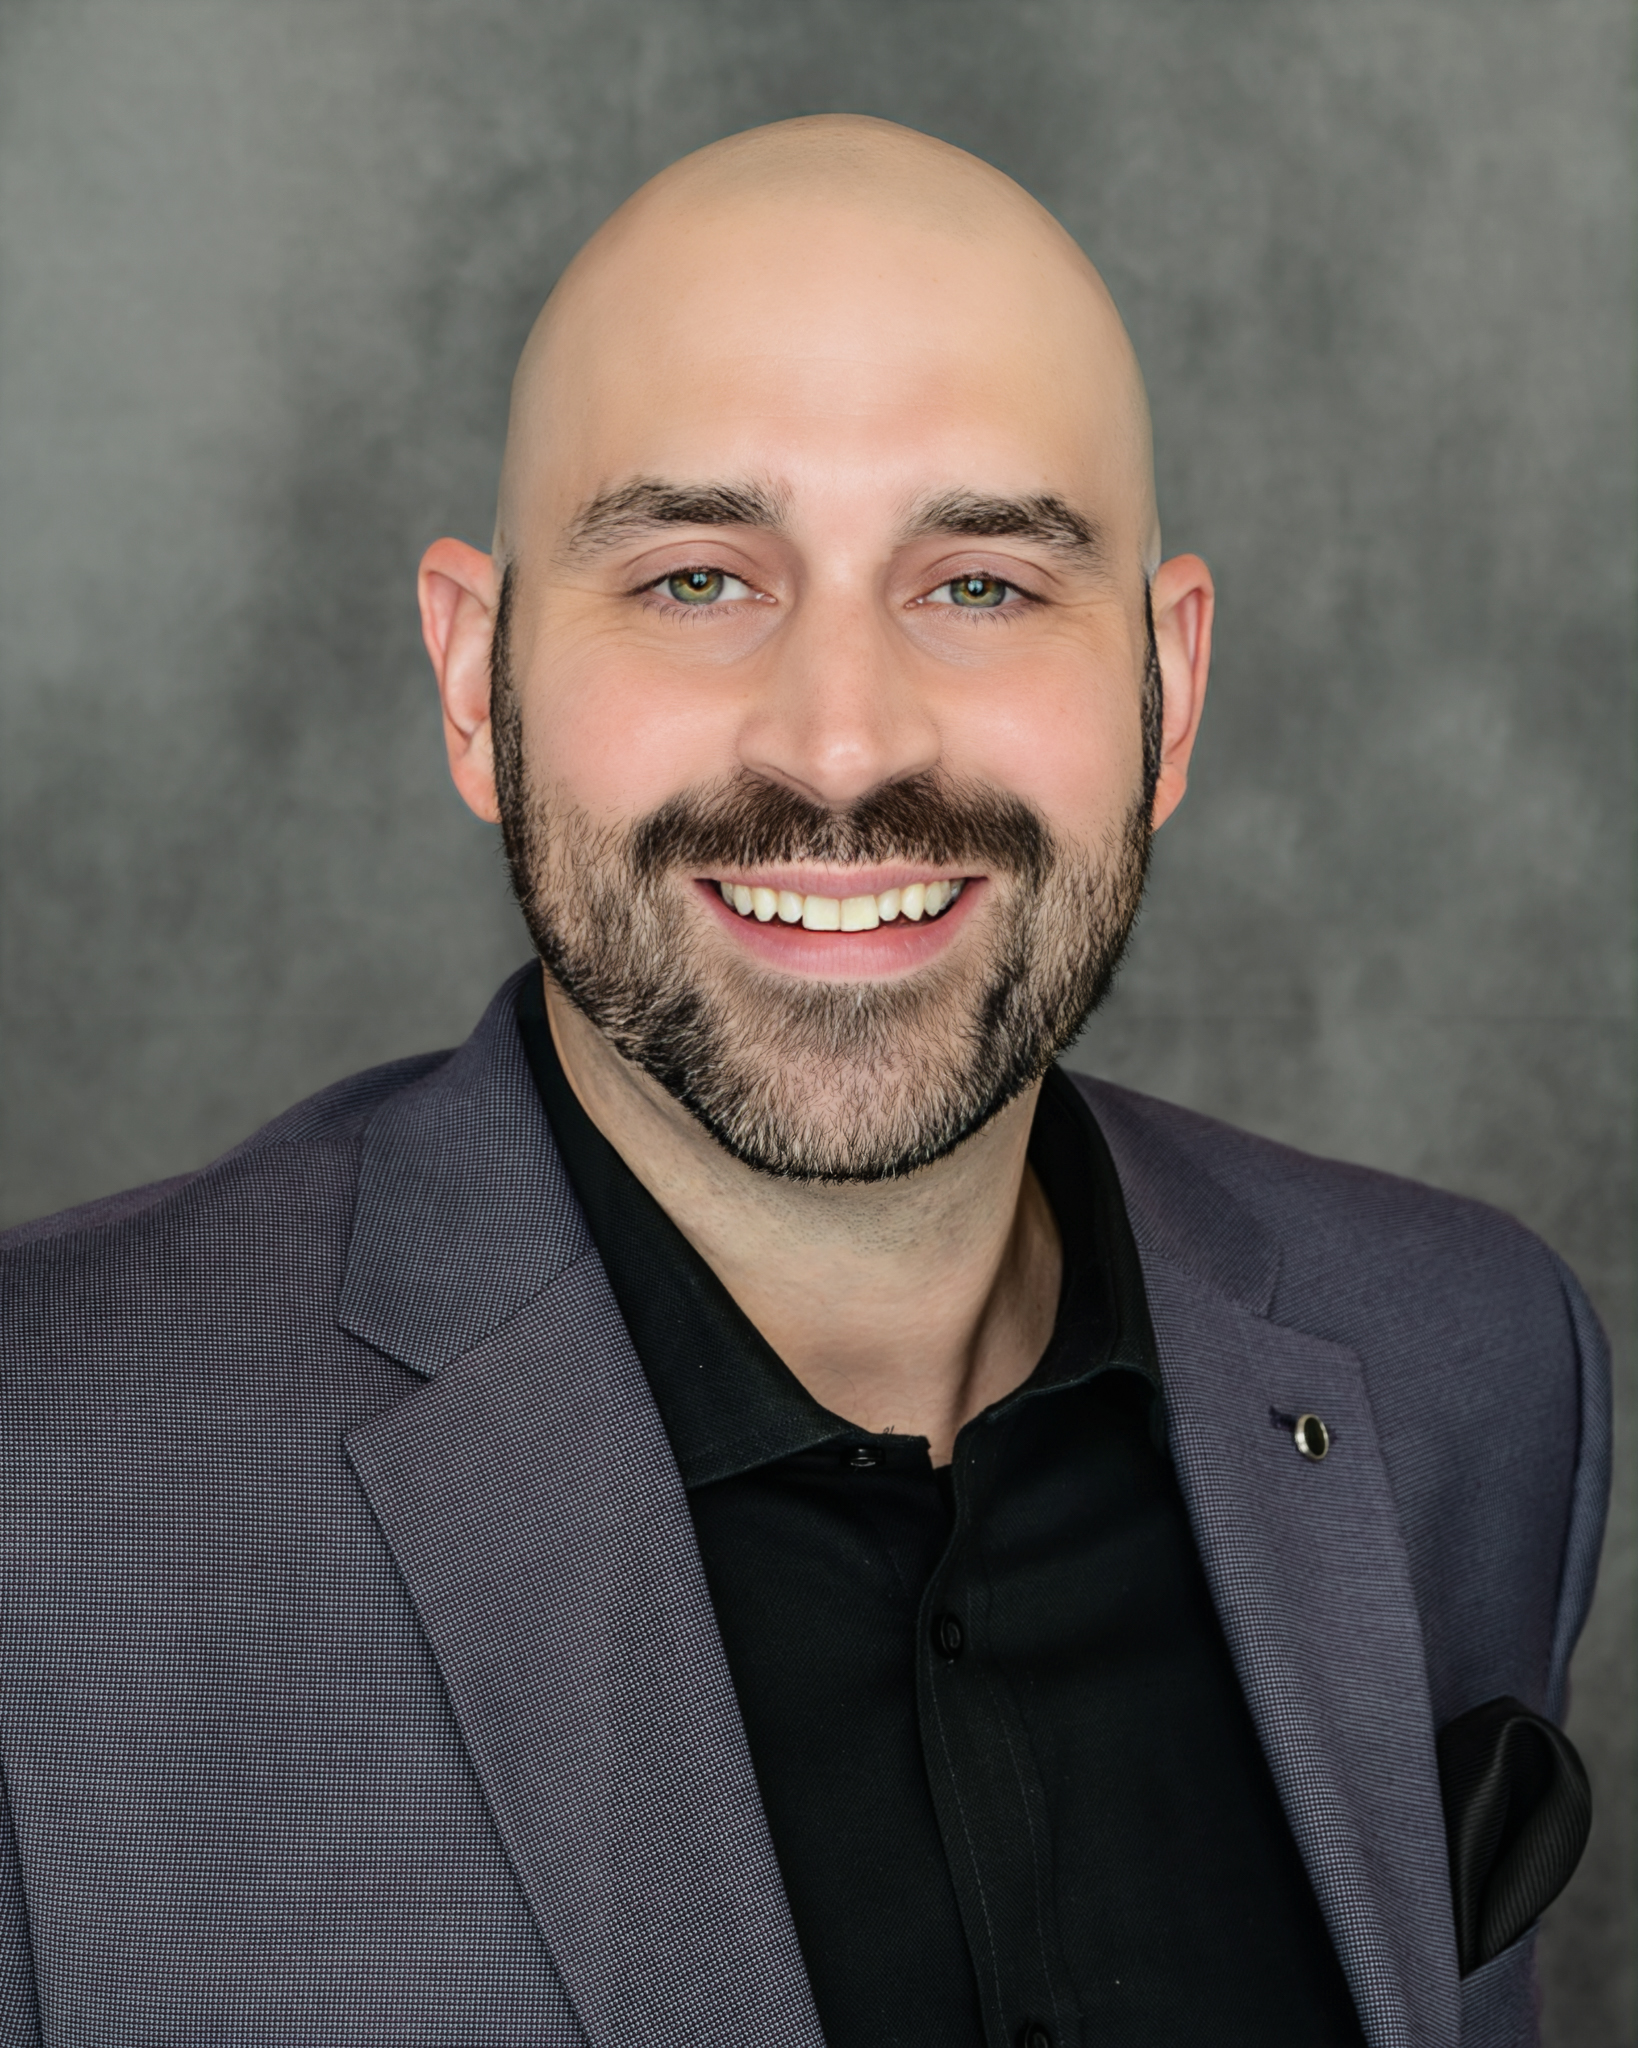 Professional headshot of IBM Watston Associate, against a clean backdrop, exuding confidence and approachability. Crisp attire and a friendly smile convey a polished and competent professional image, perfect for LinkedIn profiles and business websites.